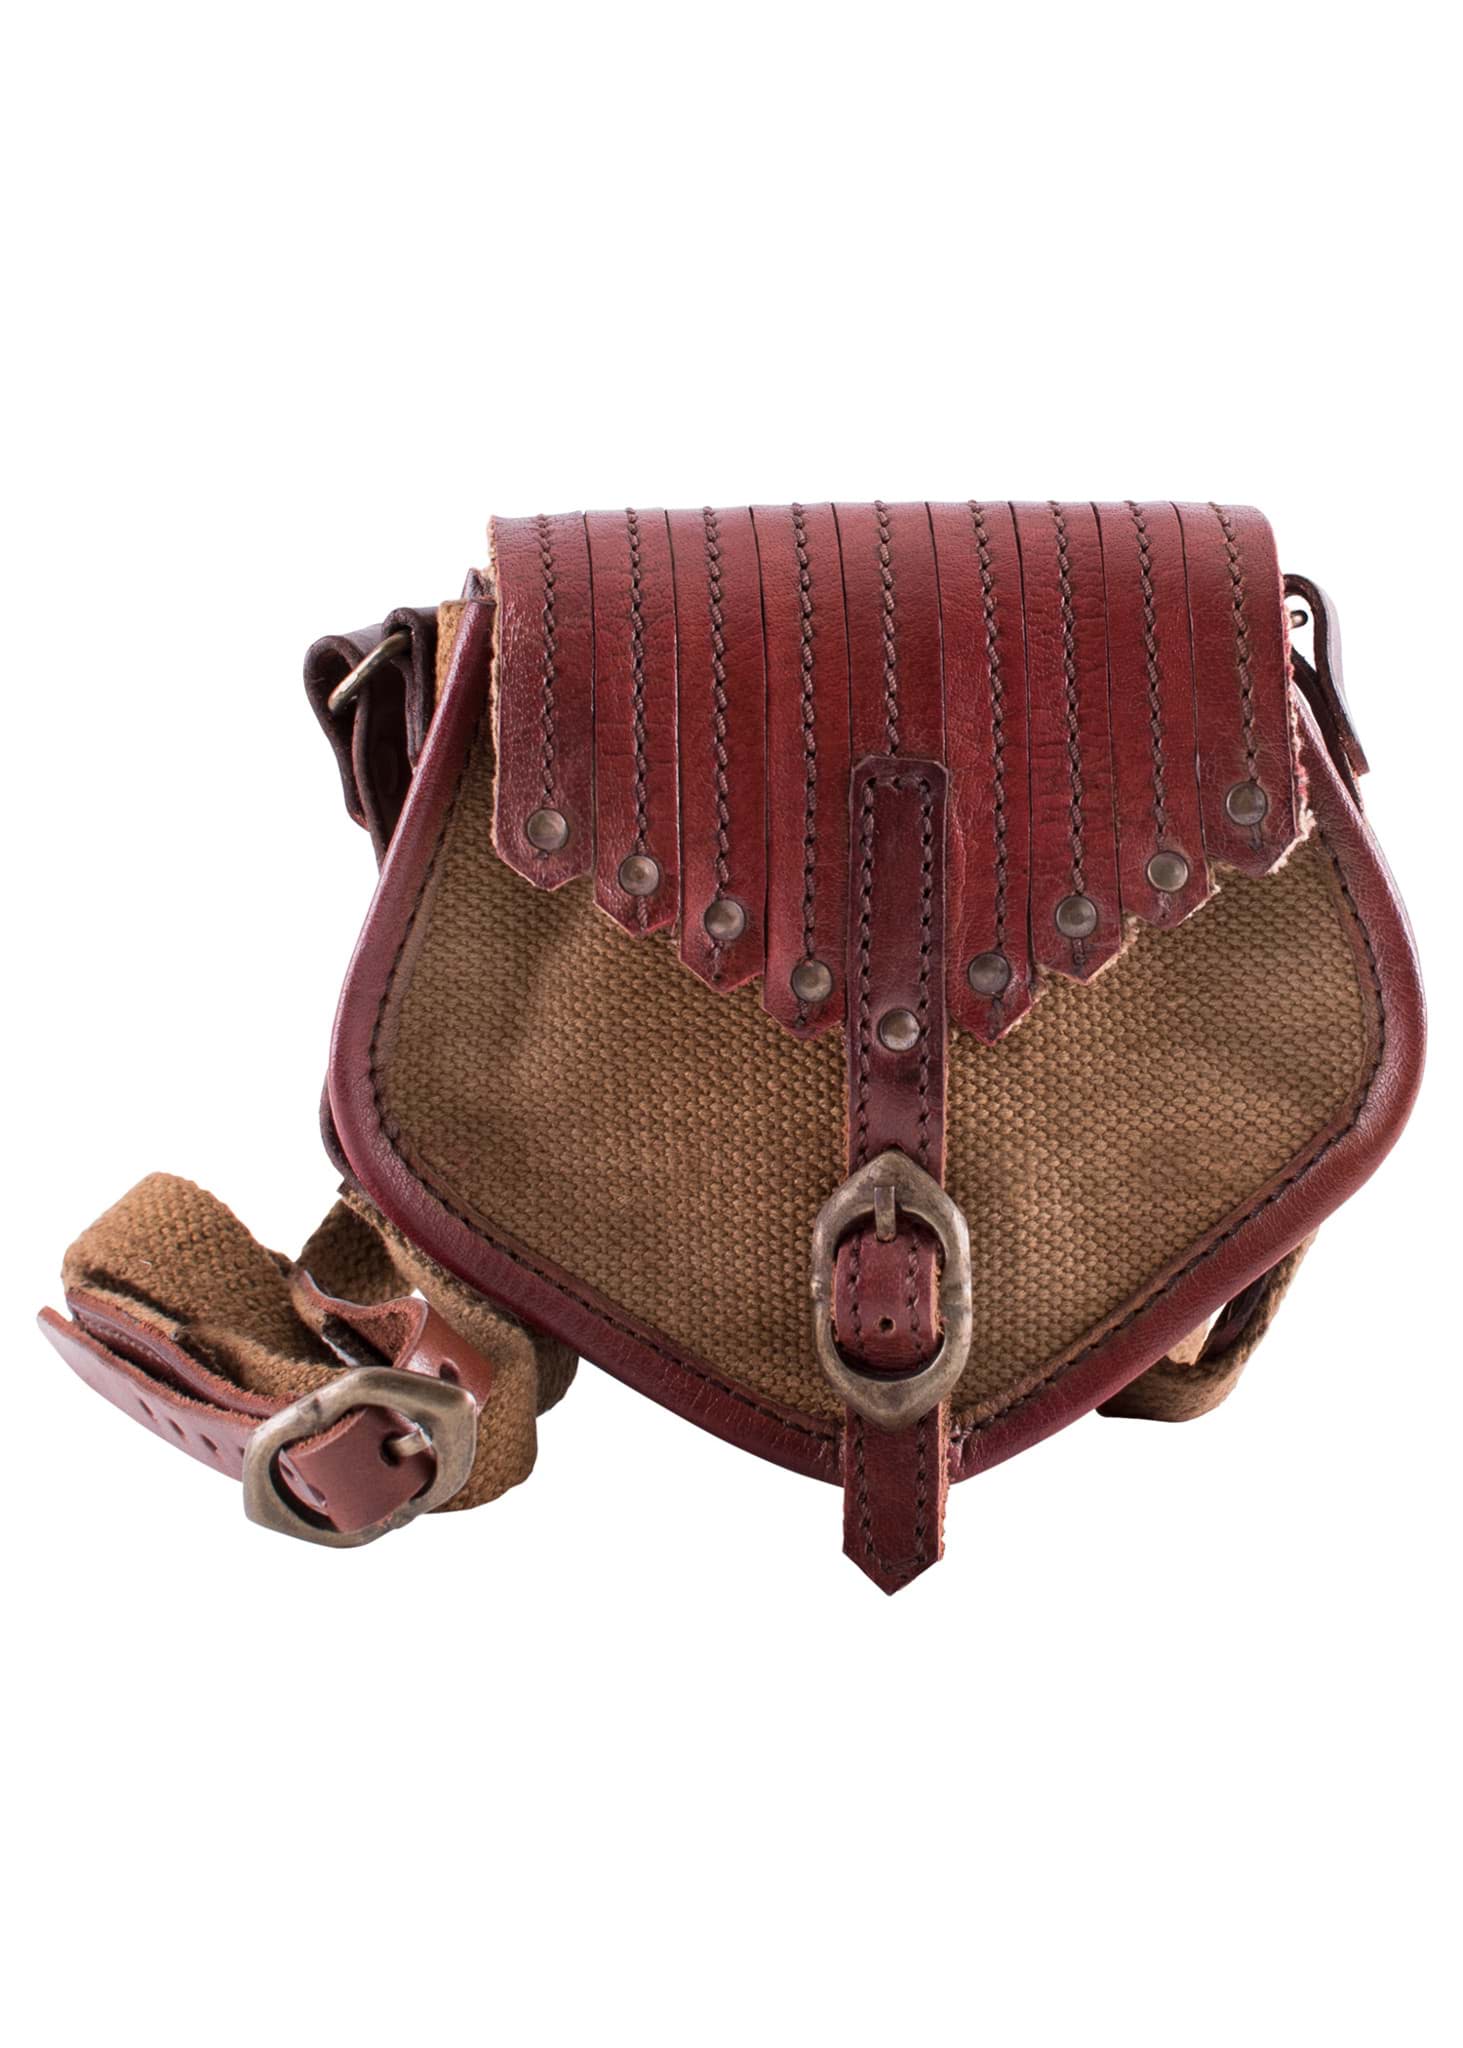 Picture of Battle Merchant - Viking Style Bag Leather and Canvas